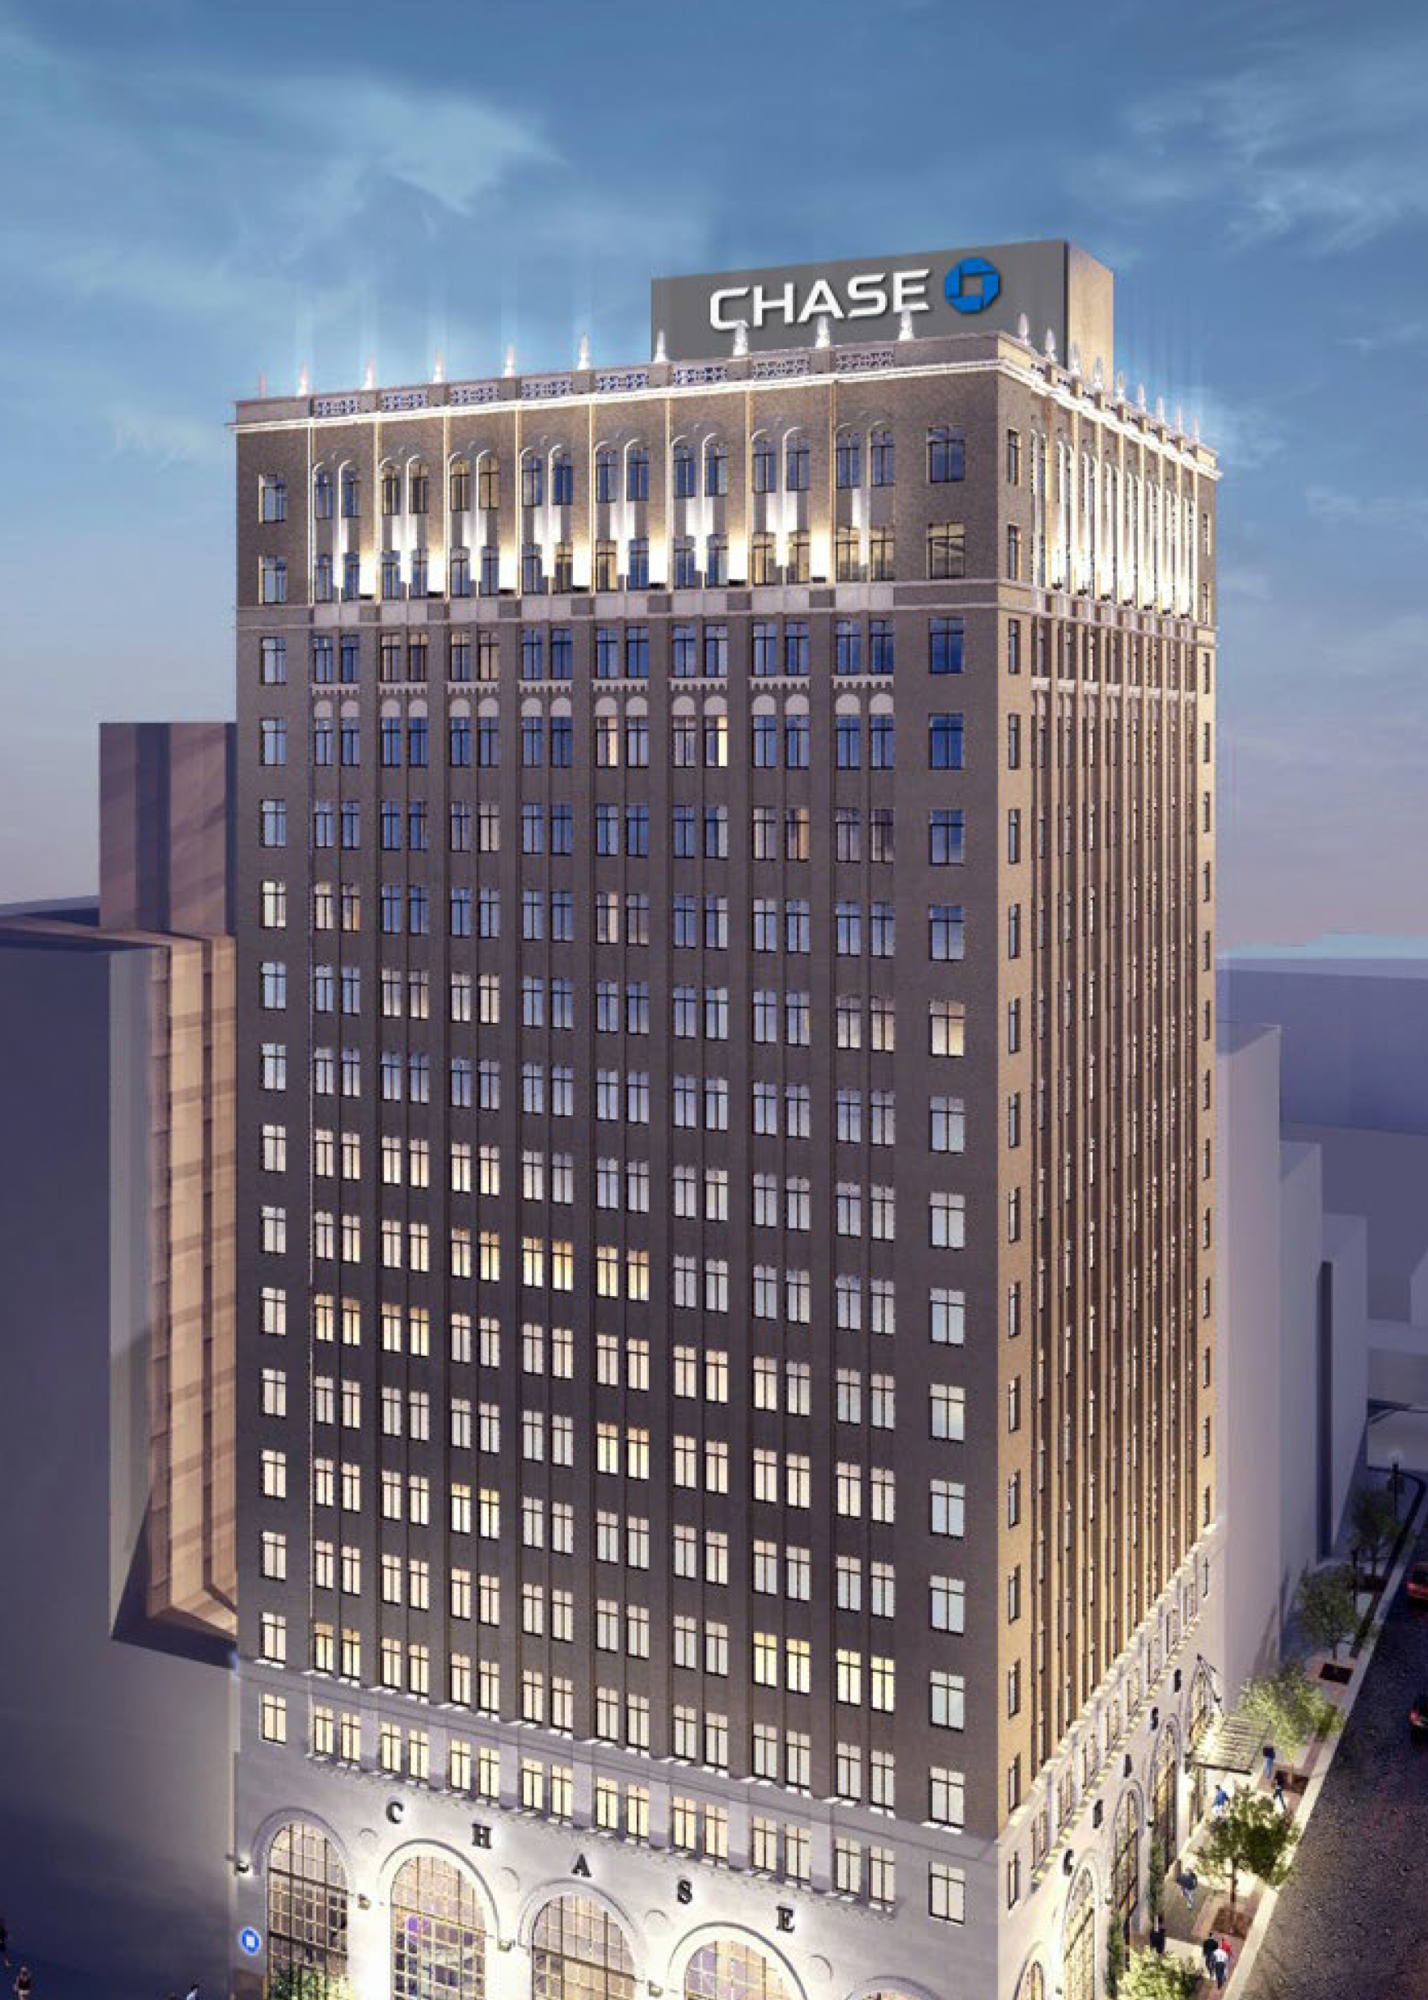 A contractor sent renderings to the city of proposed signs for Chase Bank as the anchor tenant.